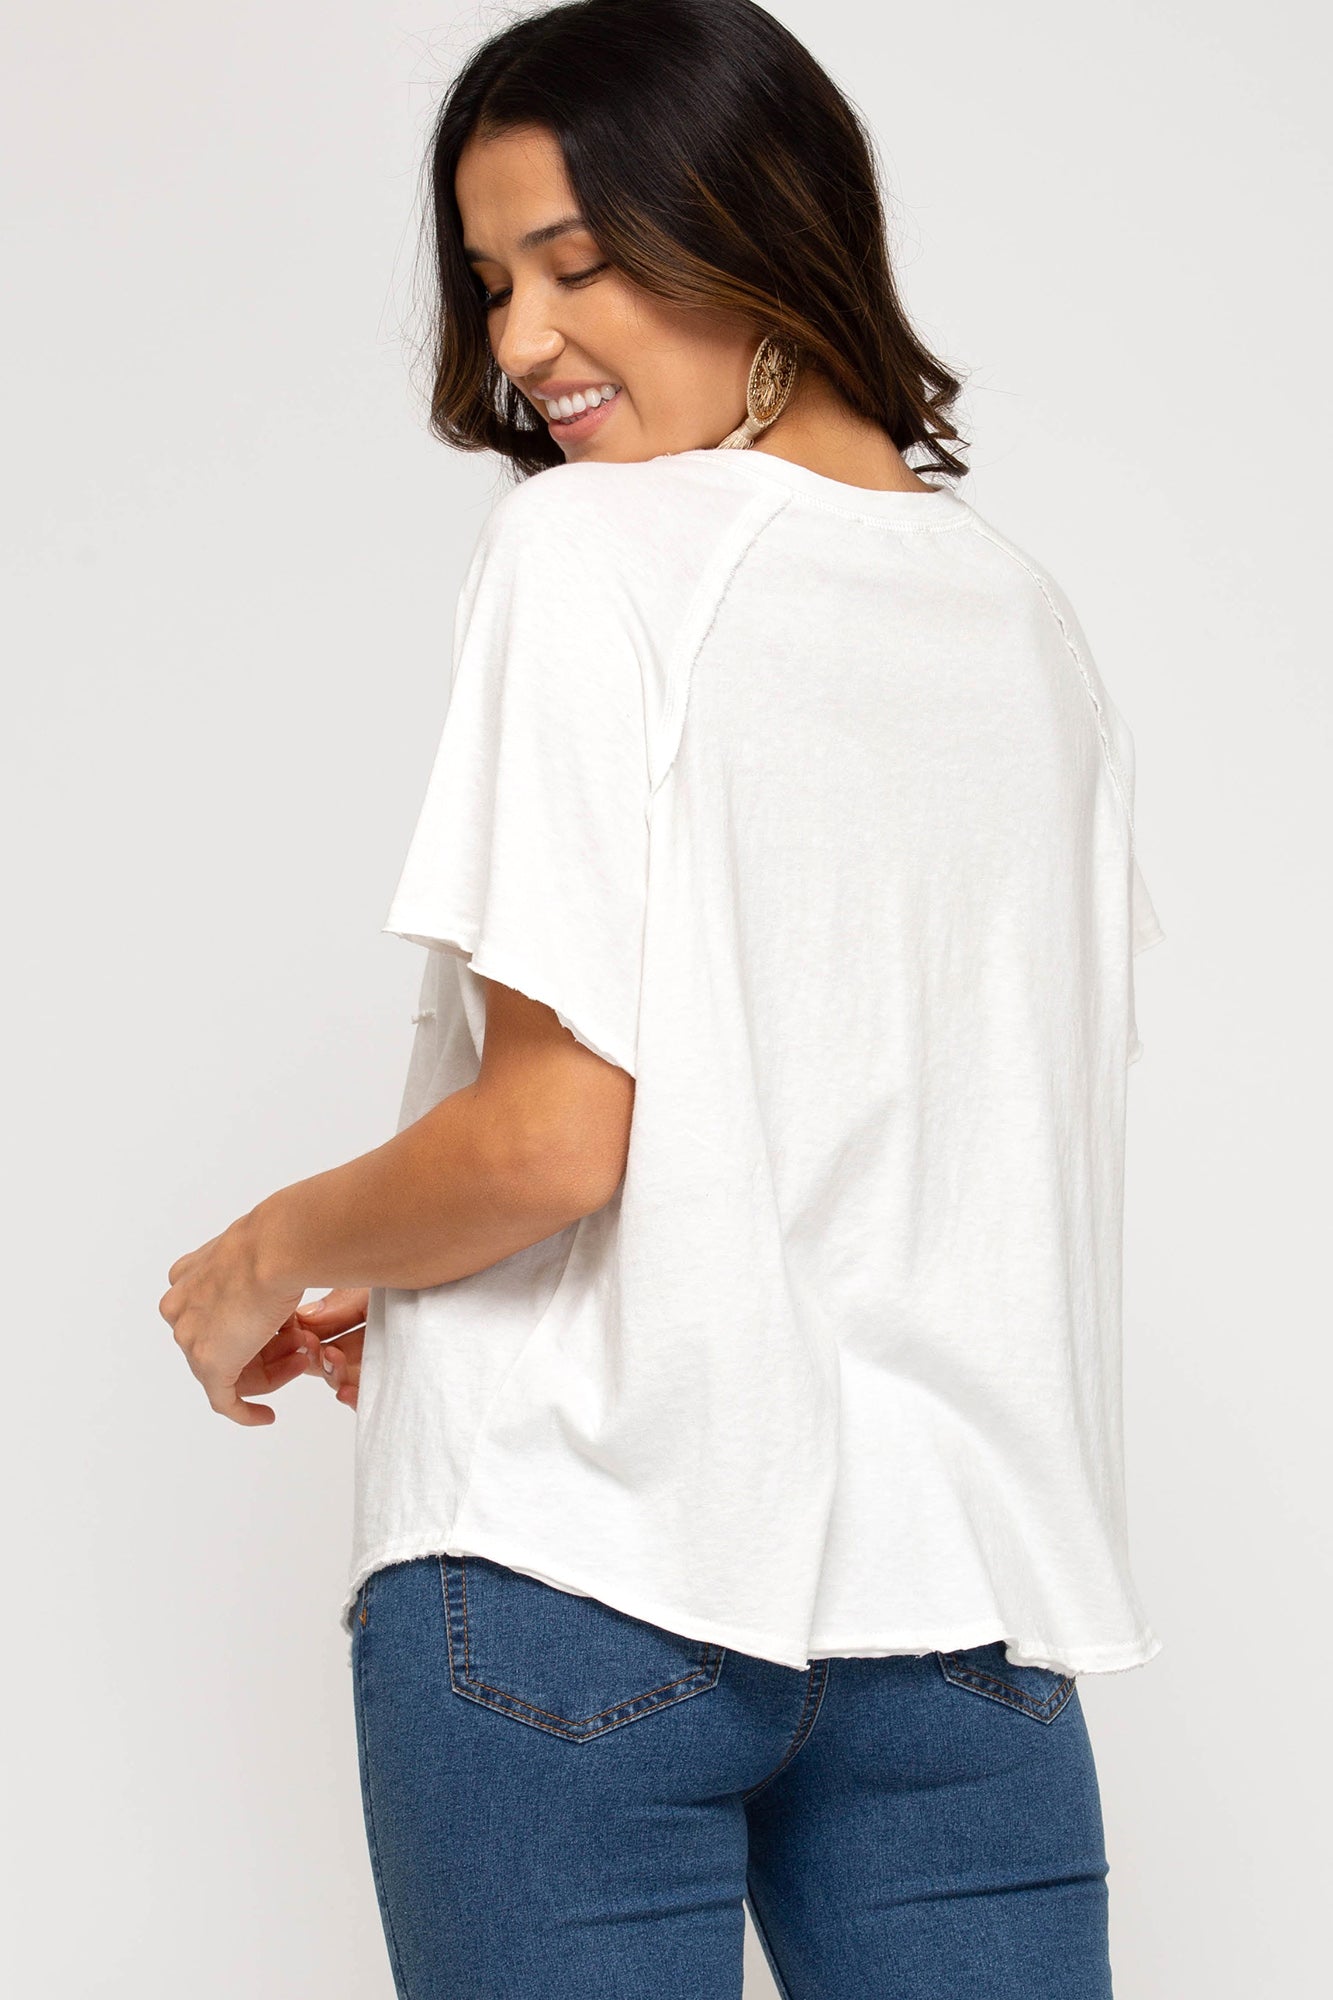 Short Sleeve Top With Pocket!